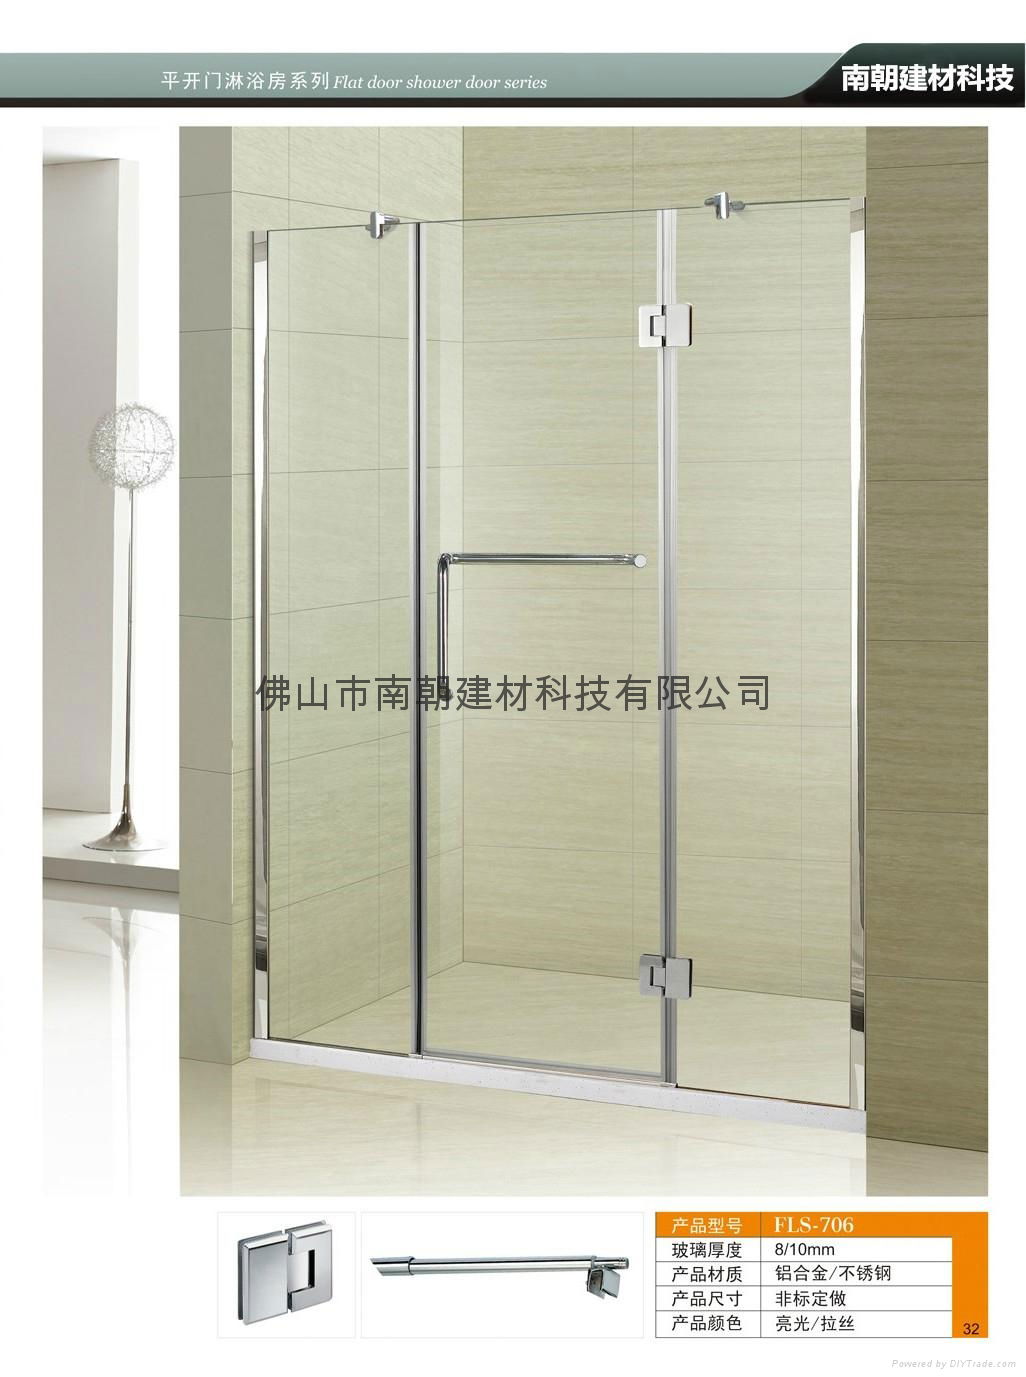 FS - 706 flat open shower room series Can be customized to sample 3